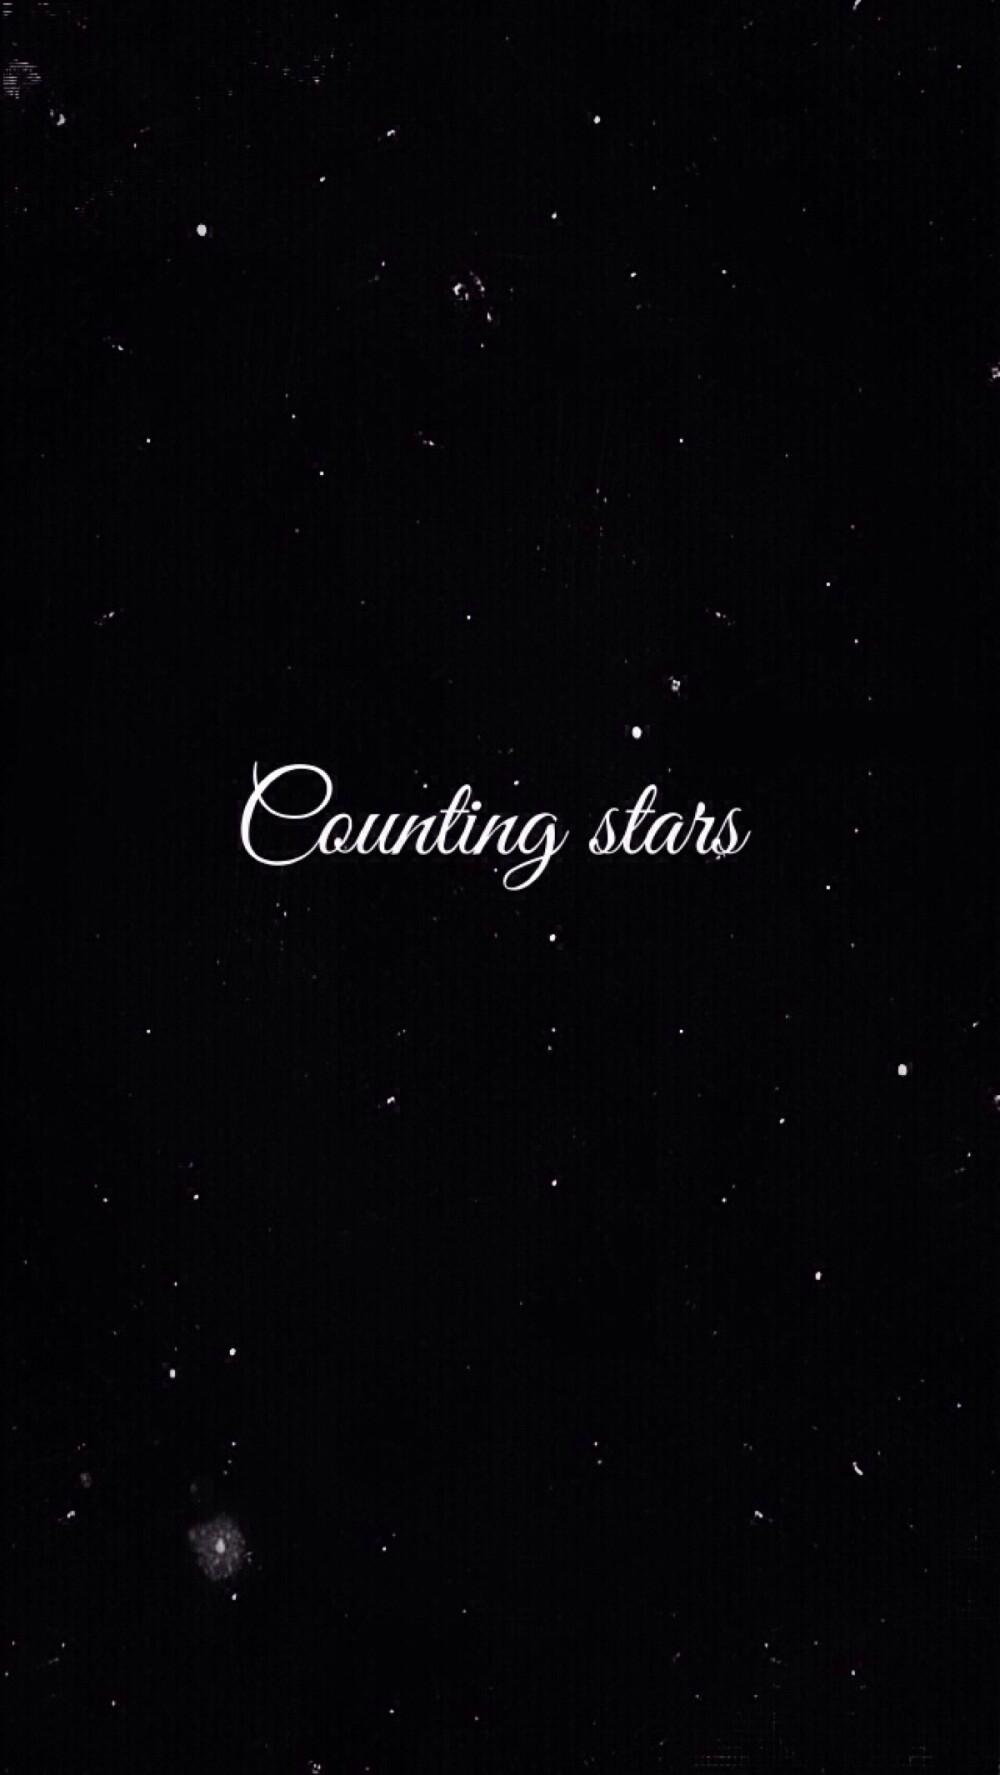 Counting stars 数星星
文字#句子
by:汛鹿